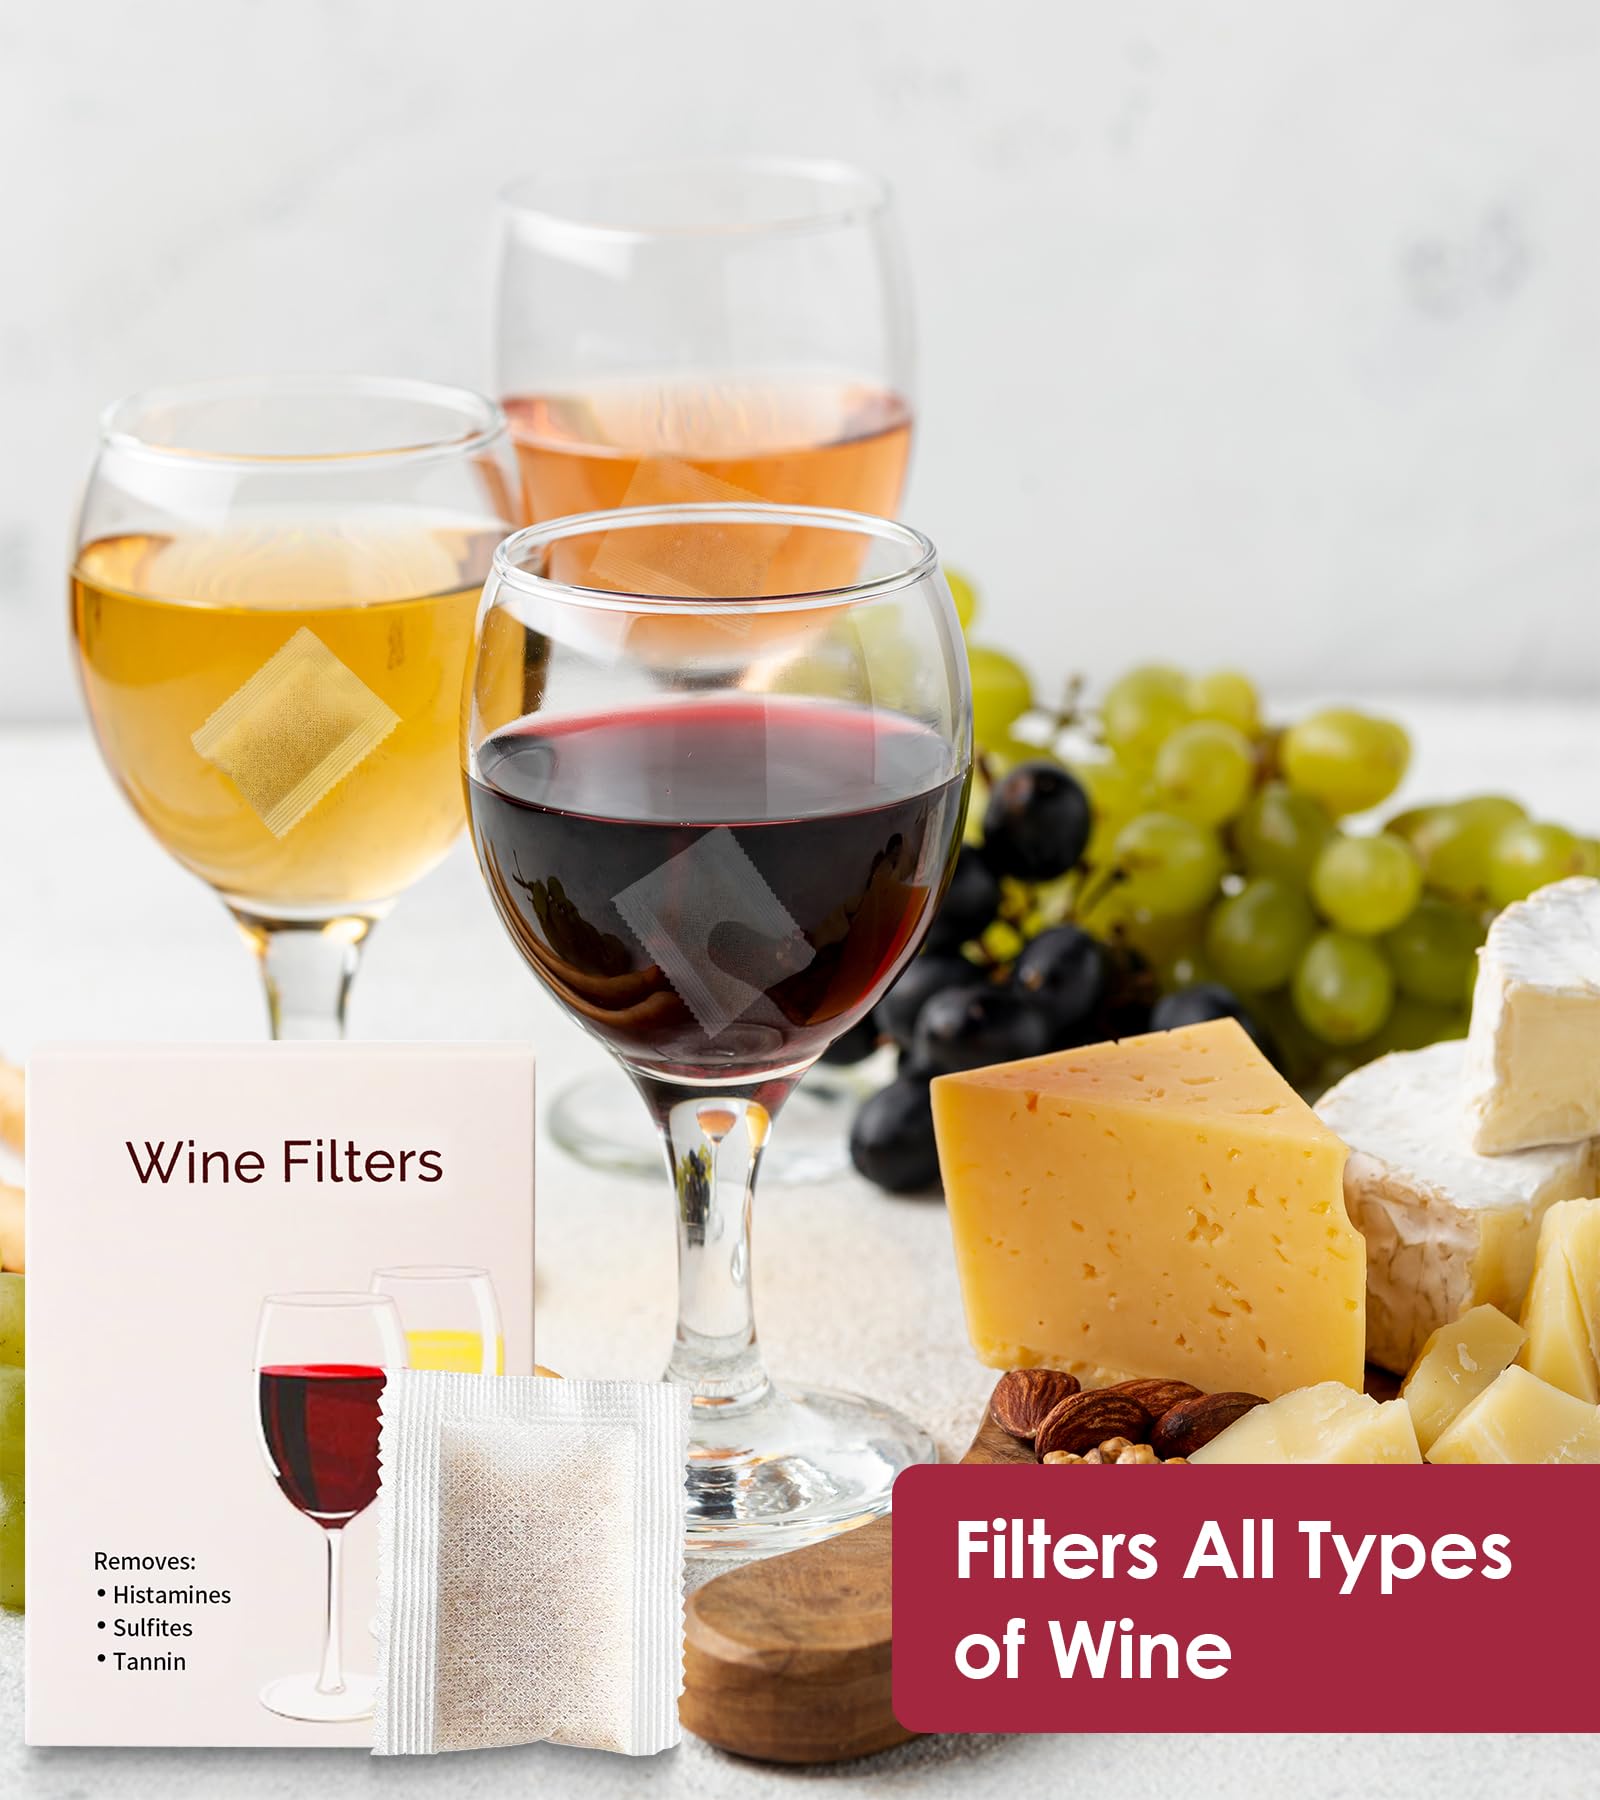 YARKOR Wine Filter 12 Packs, Removes Histamines and Sulfites, Reduce and Alleviate Wine Allergies & Sensitivities - Stops Red Wine Headaches Nausea, Natural Purifier Filters